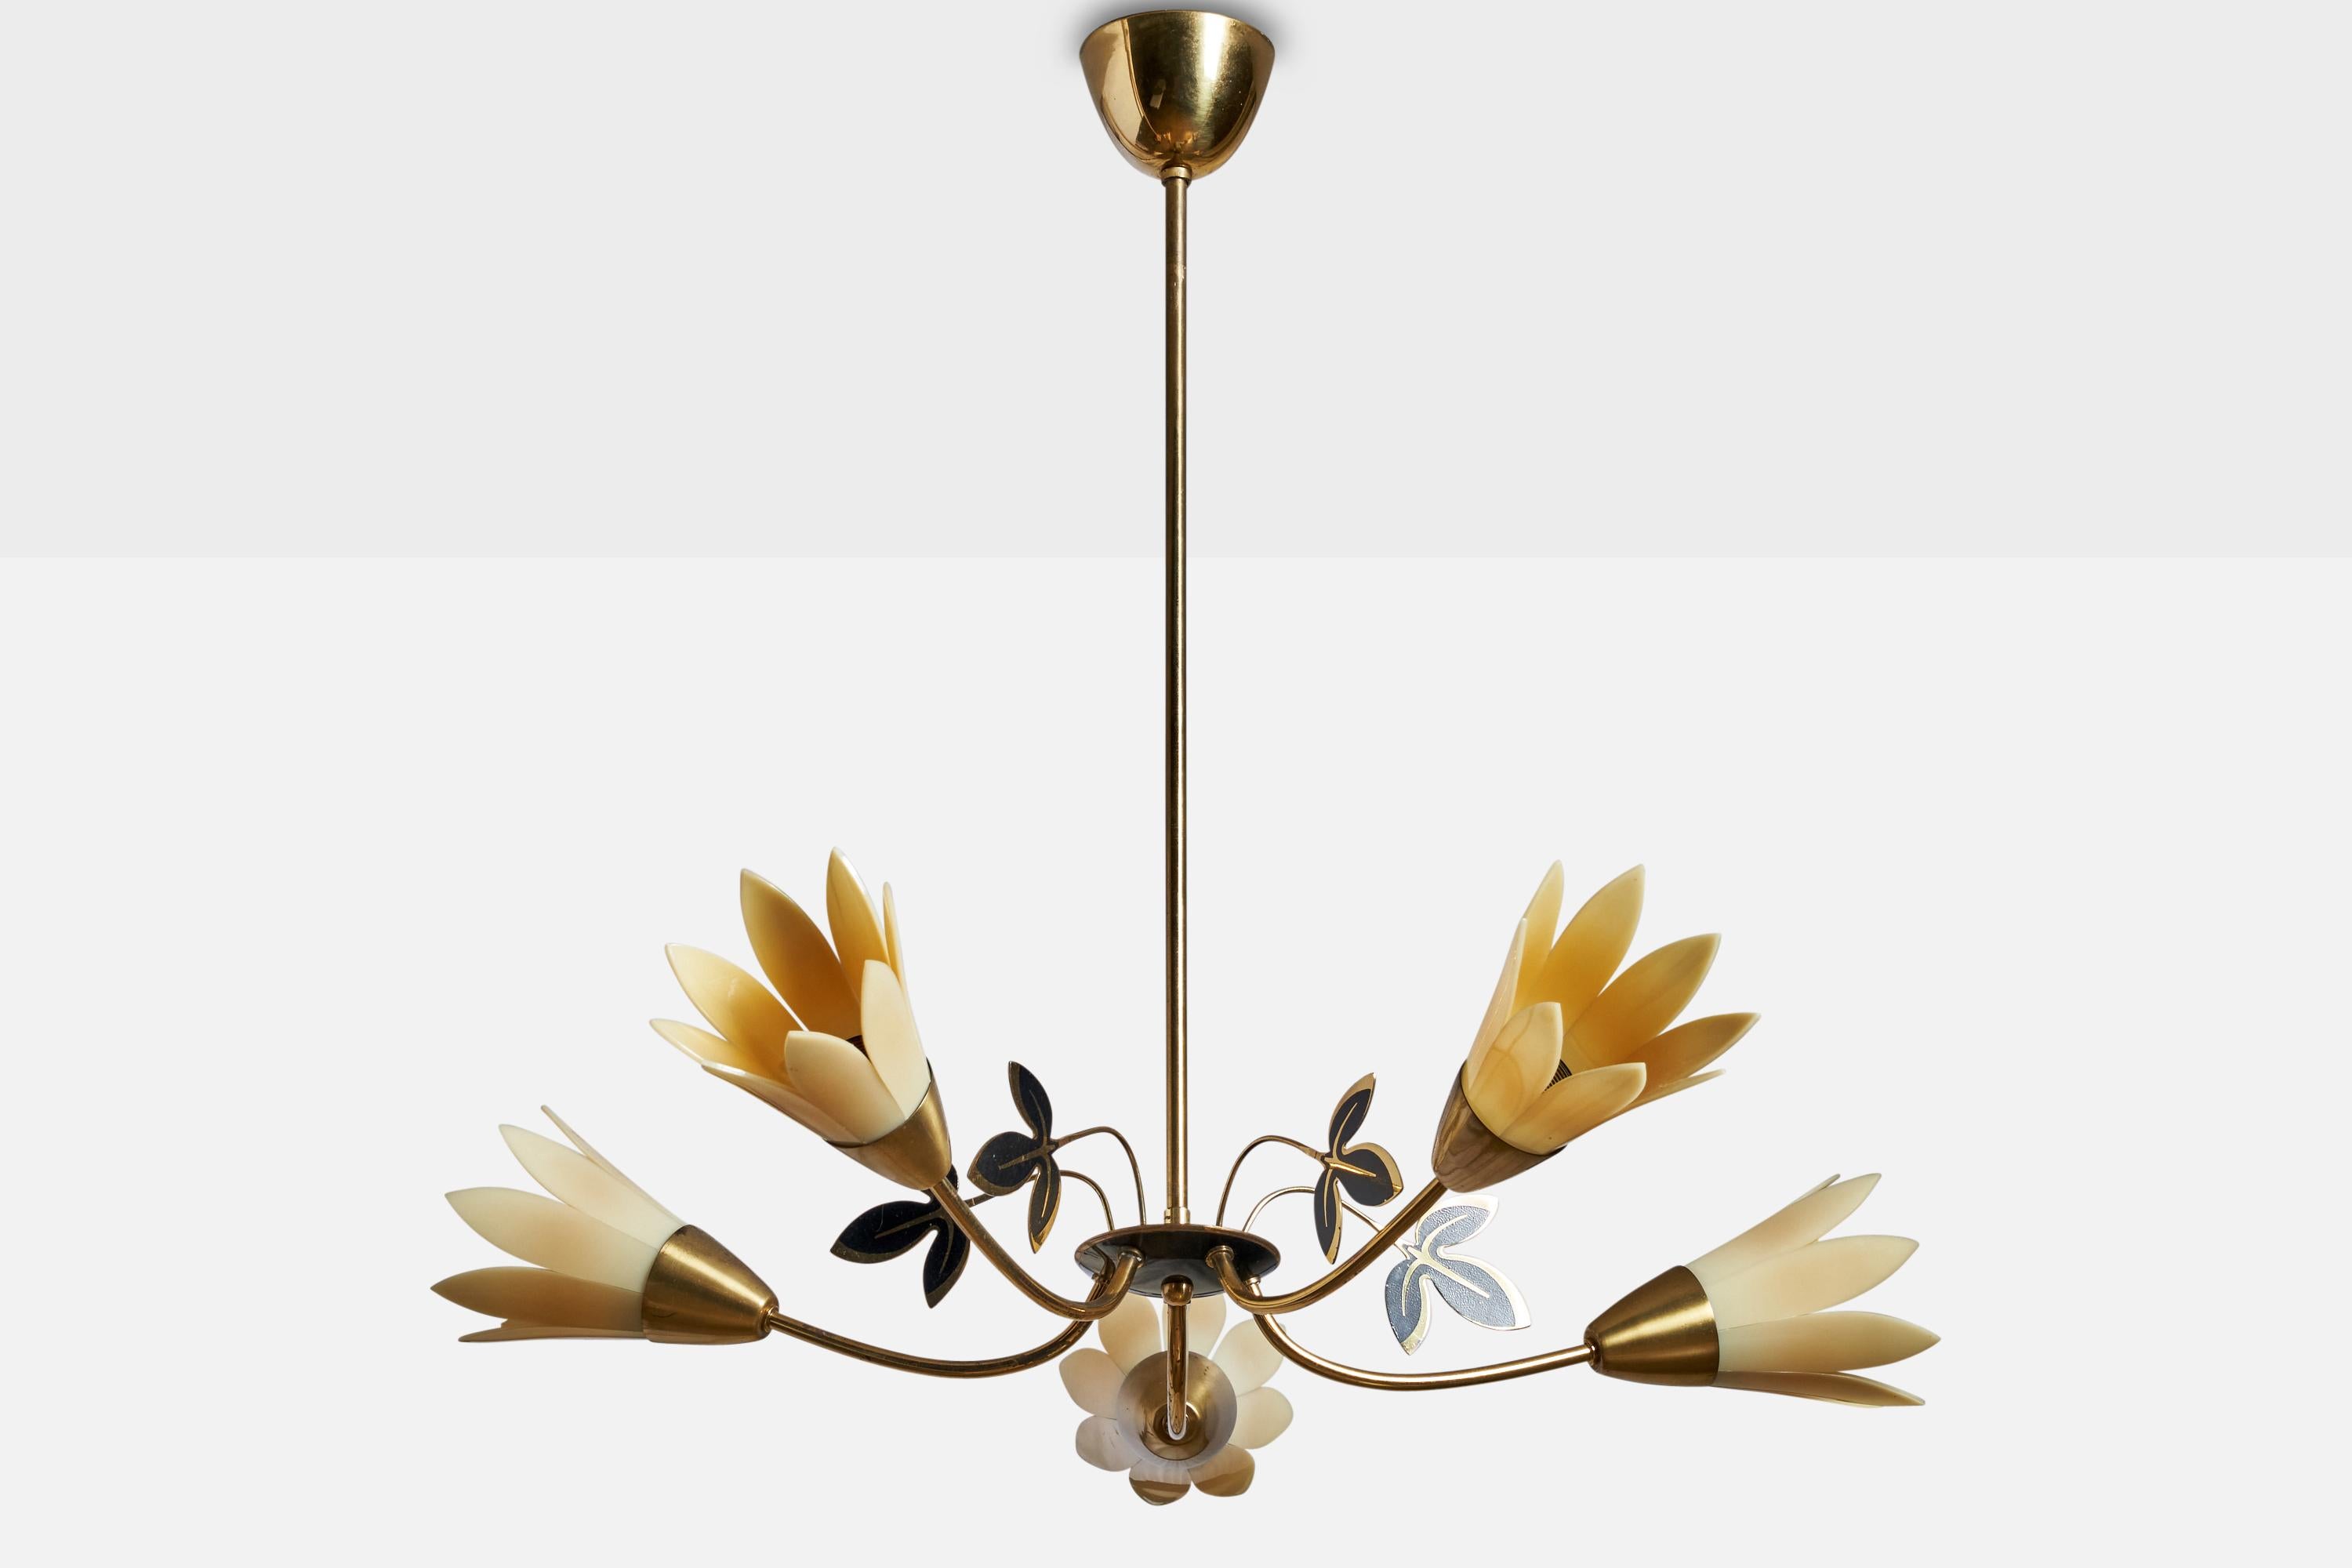 A brass and beige acrylic chandelier designed and produced in Sweden, 1950s.

Dimensions of canopy (inches): 2.5” H x 3.25” Diameter
Socket takes standard E-14 bulbs. 5 sockets.There is no maximum wattage stated on the fixture. All lighting will be